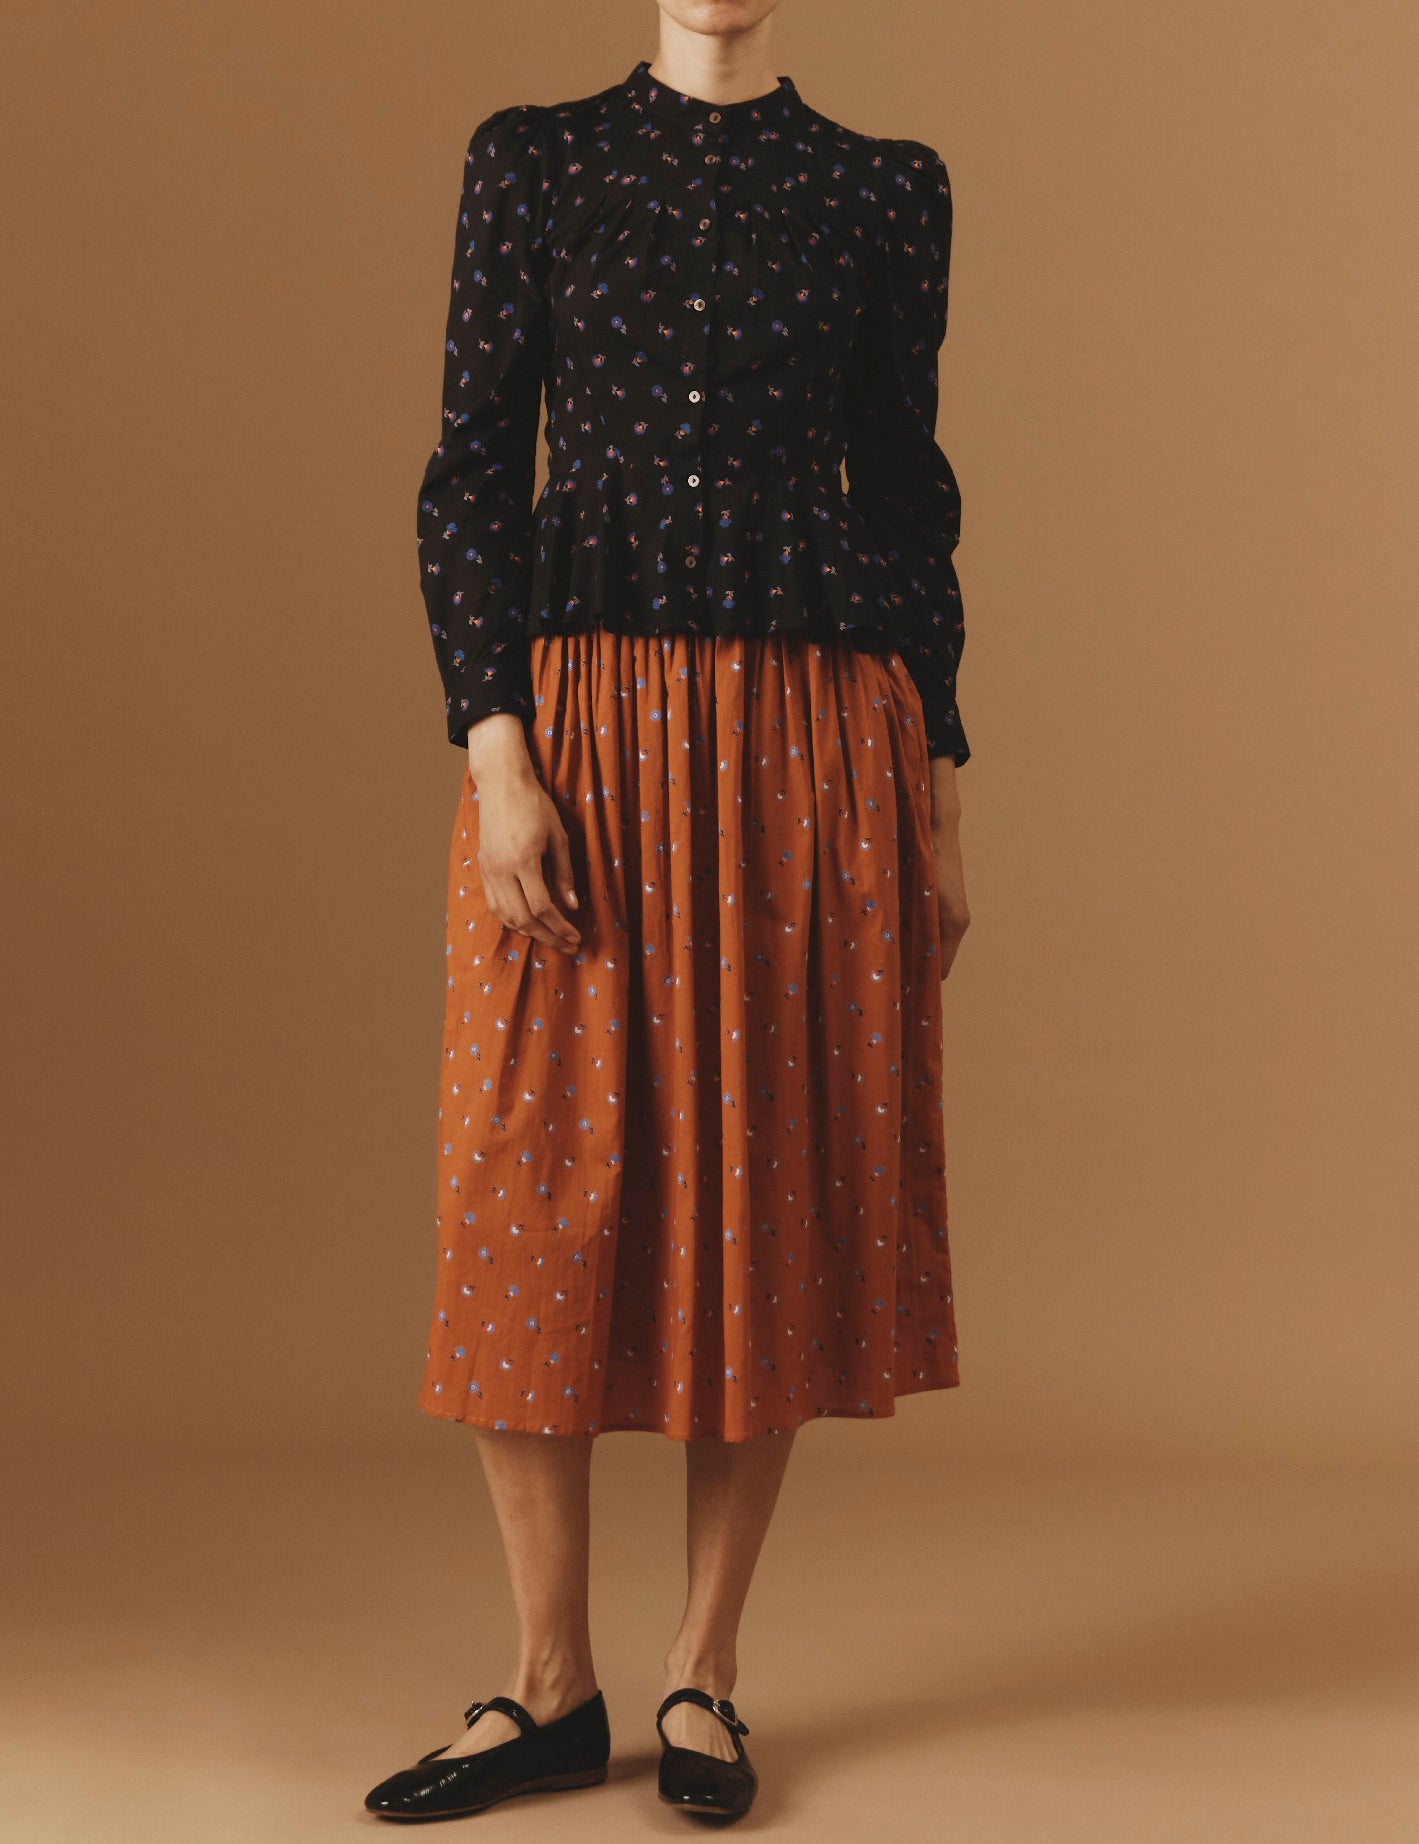 View front of Alix Black Carnation Print Blouse with Verde Orange Skirt  by Thierry Colson - Pre Spring